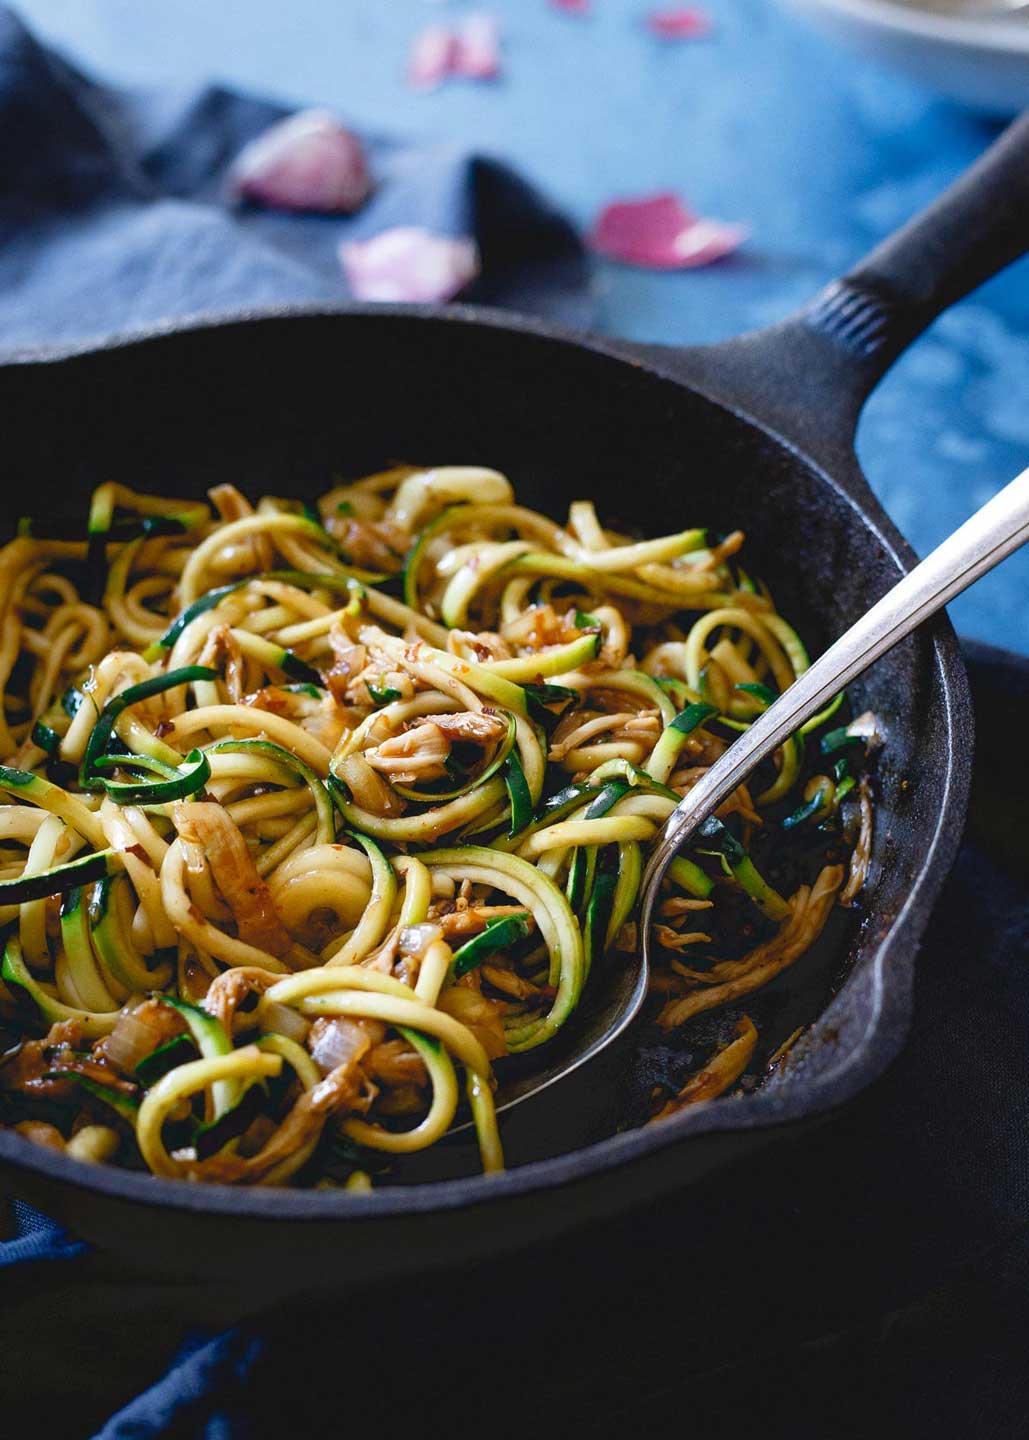 https://twohealthykitchens.com/wp-content/uploads/2017/11/Healthy-Zoodles-Zucchini-Noodles-Recipe-Chinese-Chicken-Zoodles.jpg